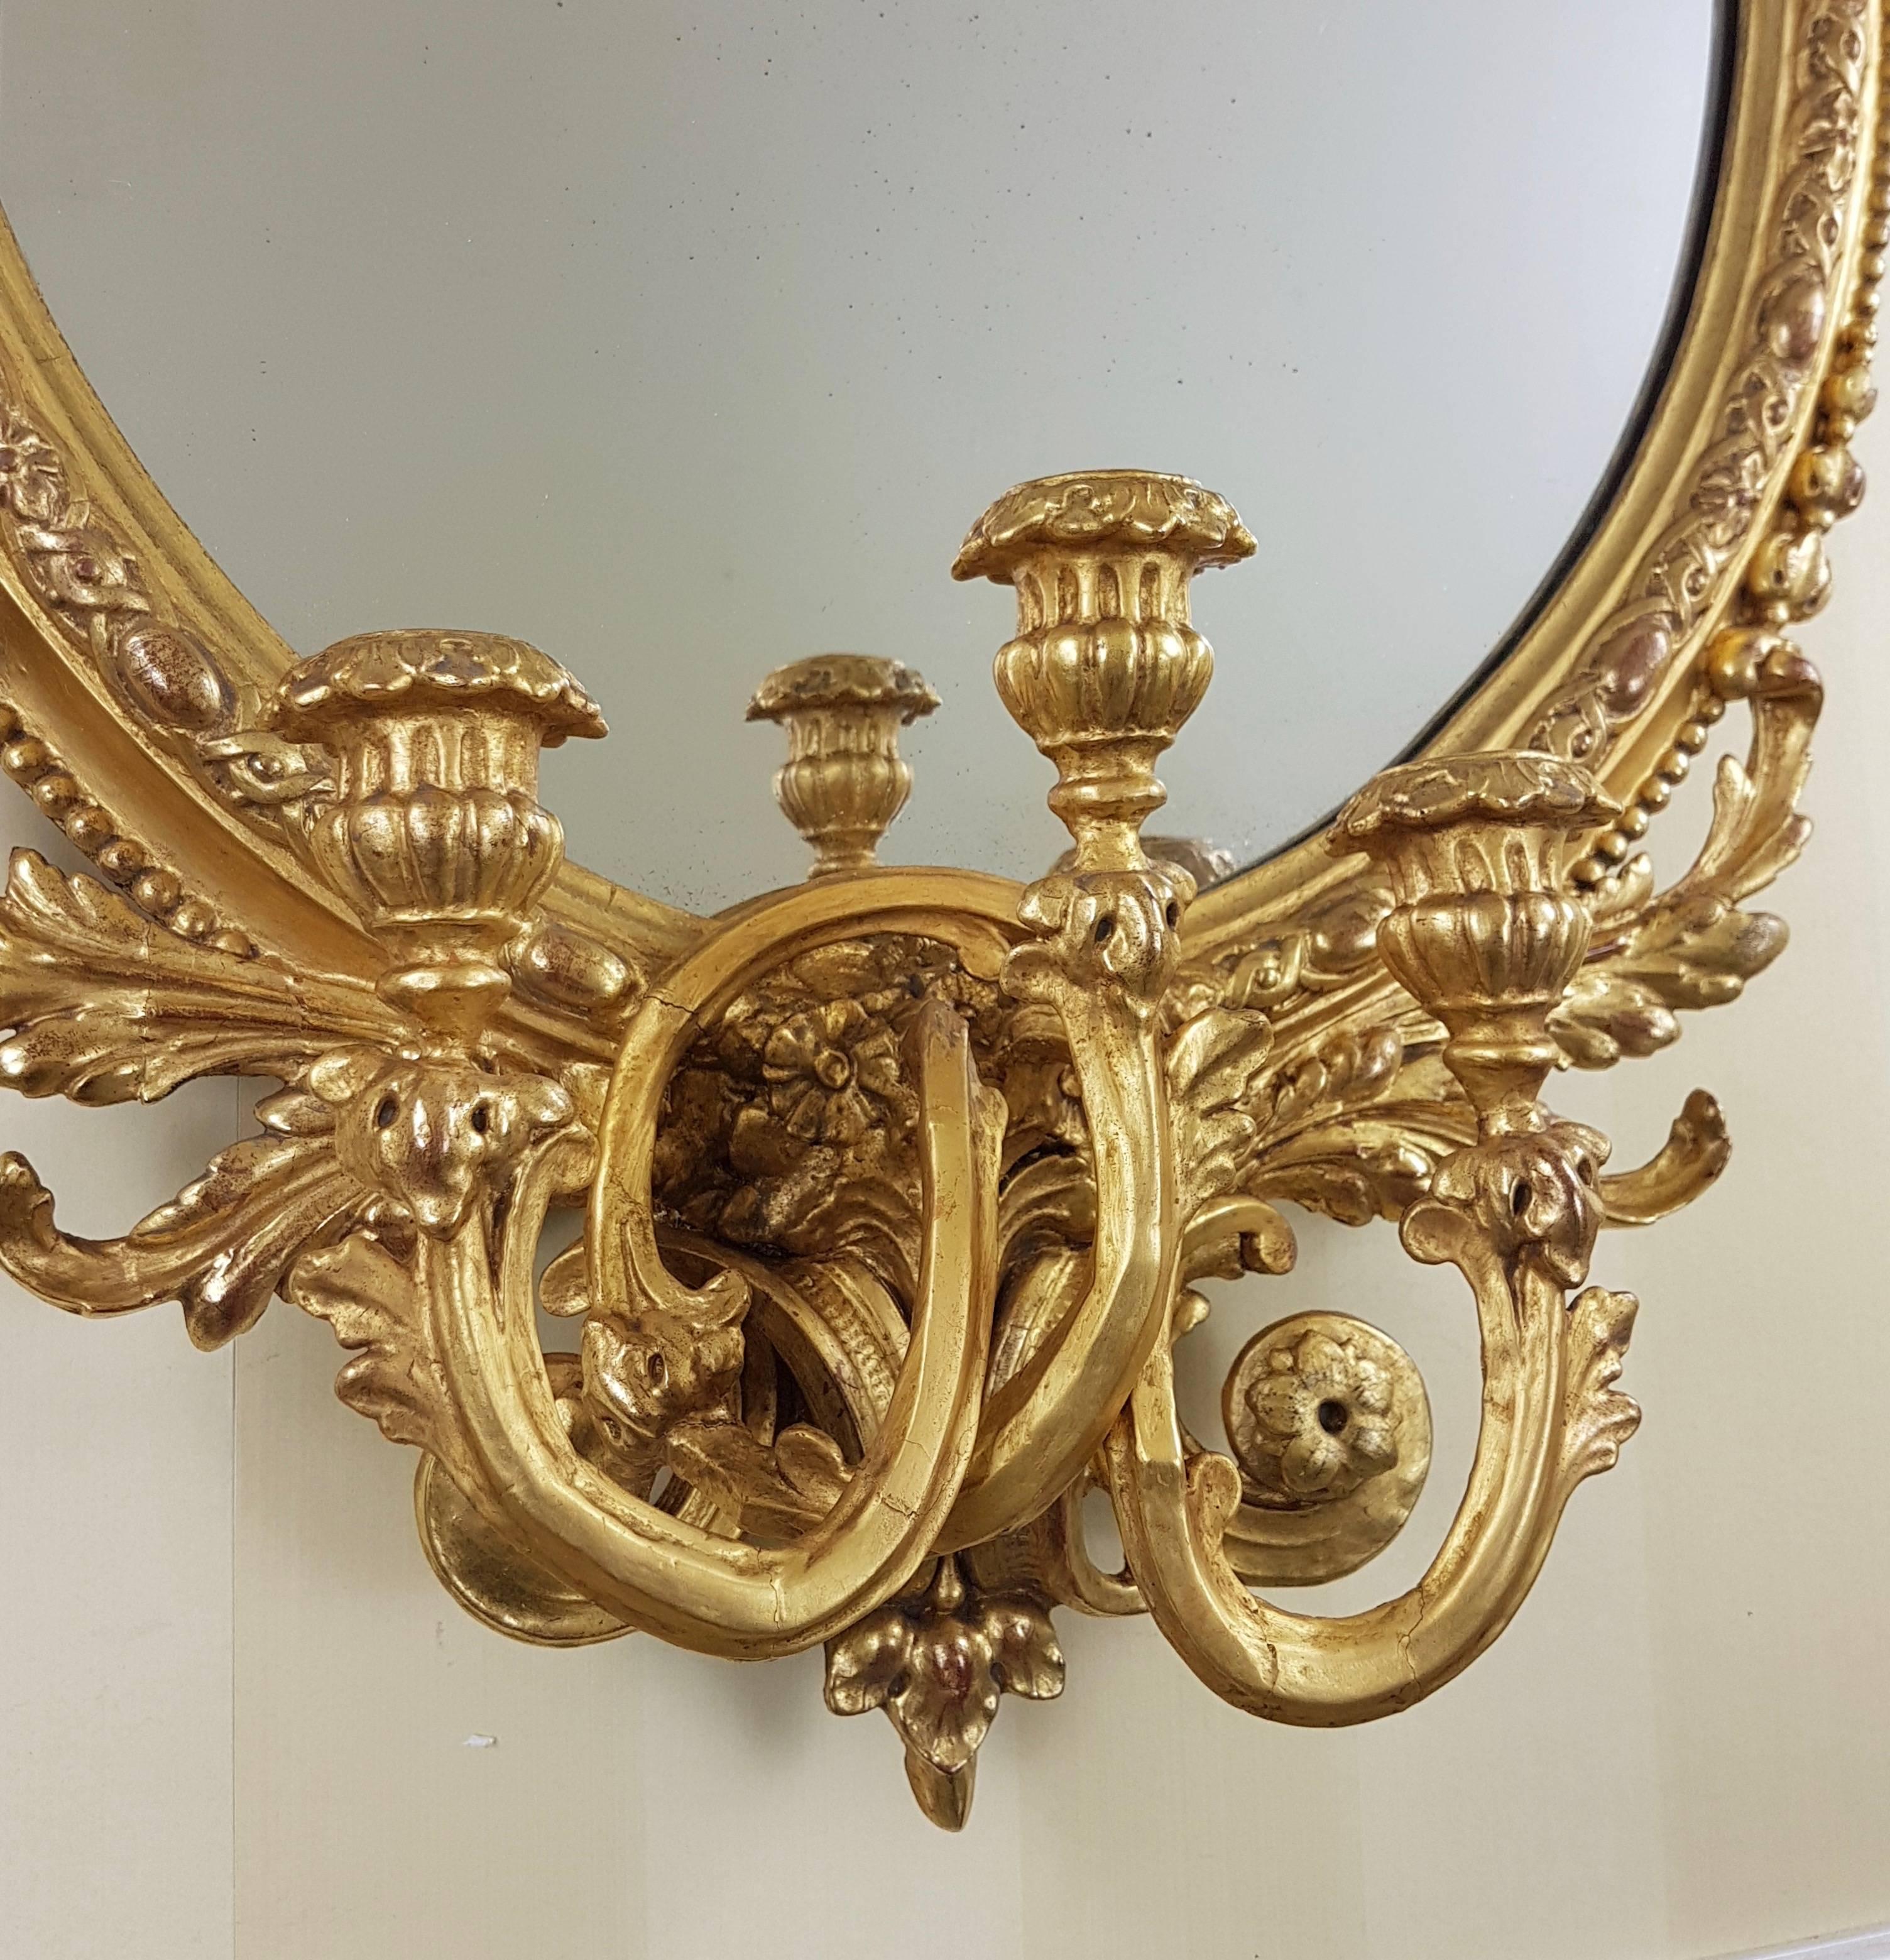 Water gilt three light girandole mirror decorated with acanthus leaves and surmounted by a central crest.

This item is on show in Berkshire - UK